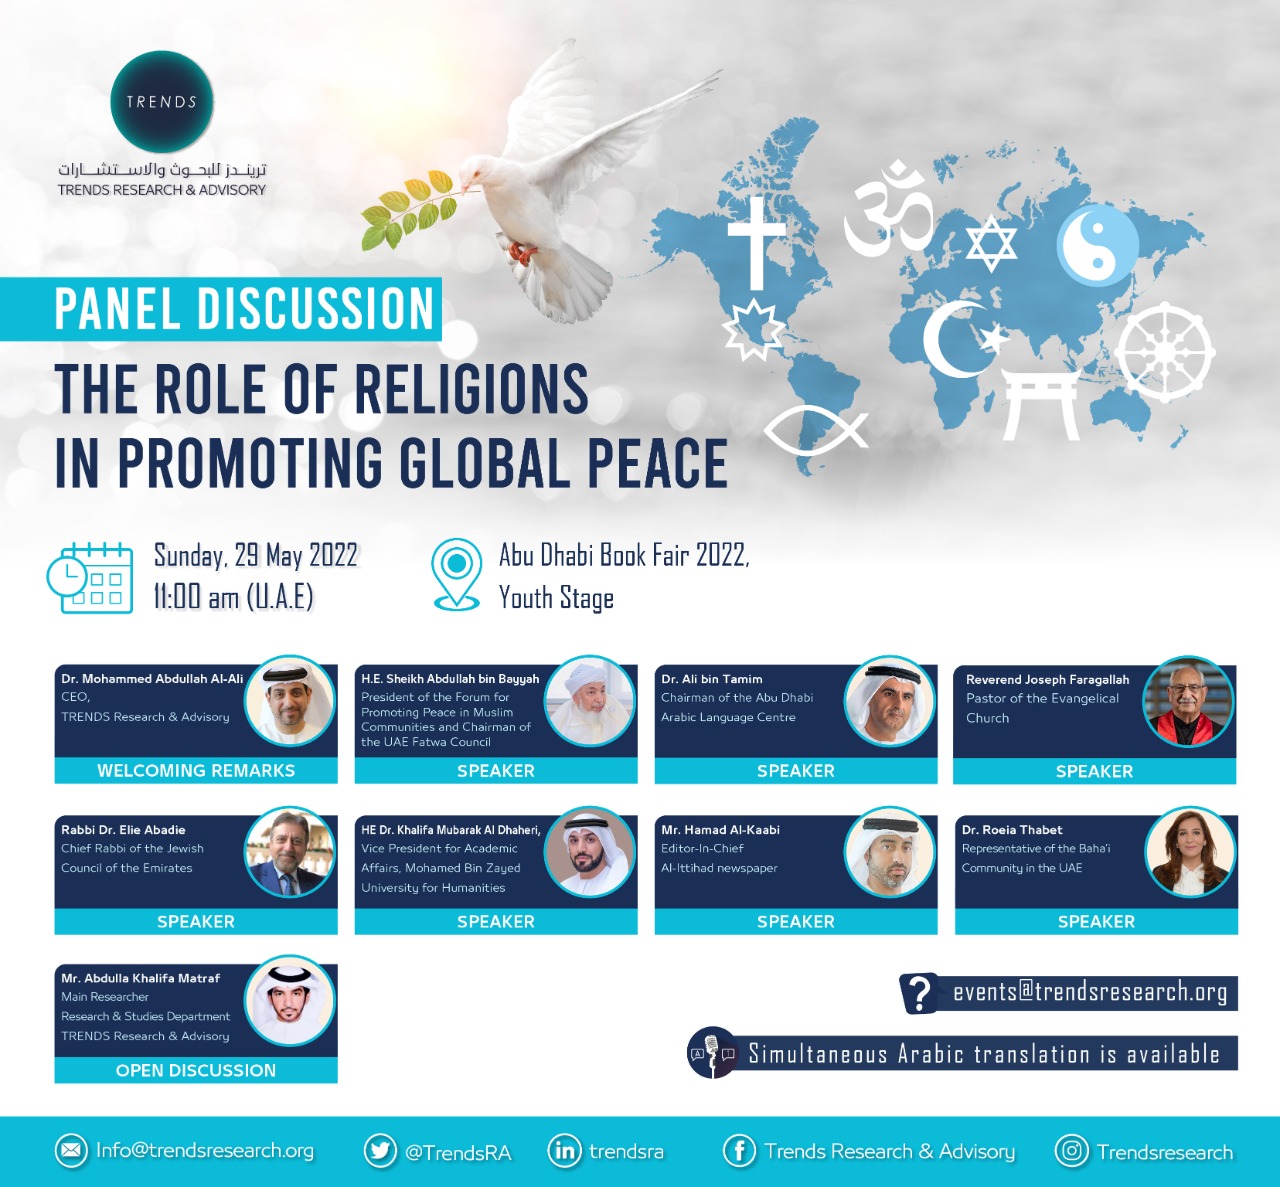 The Role of Religions in Promoting Global Peace